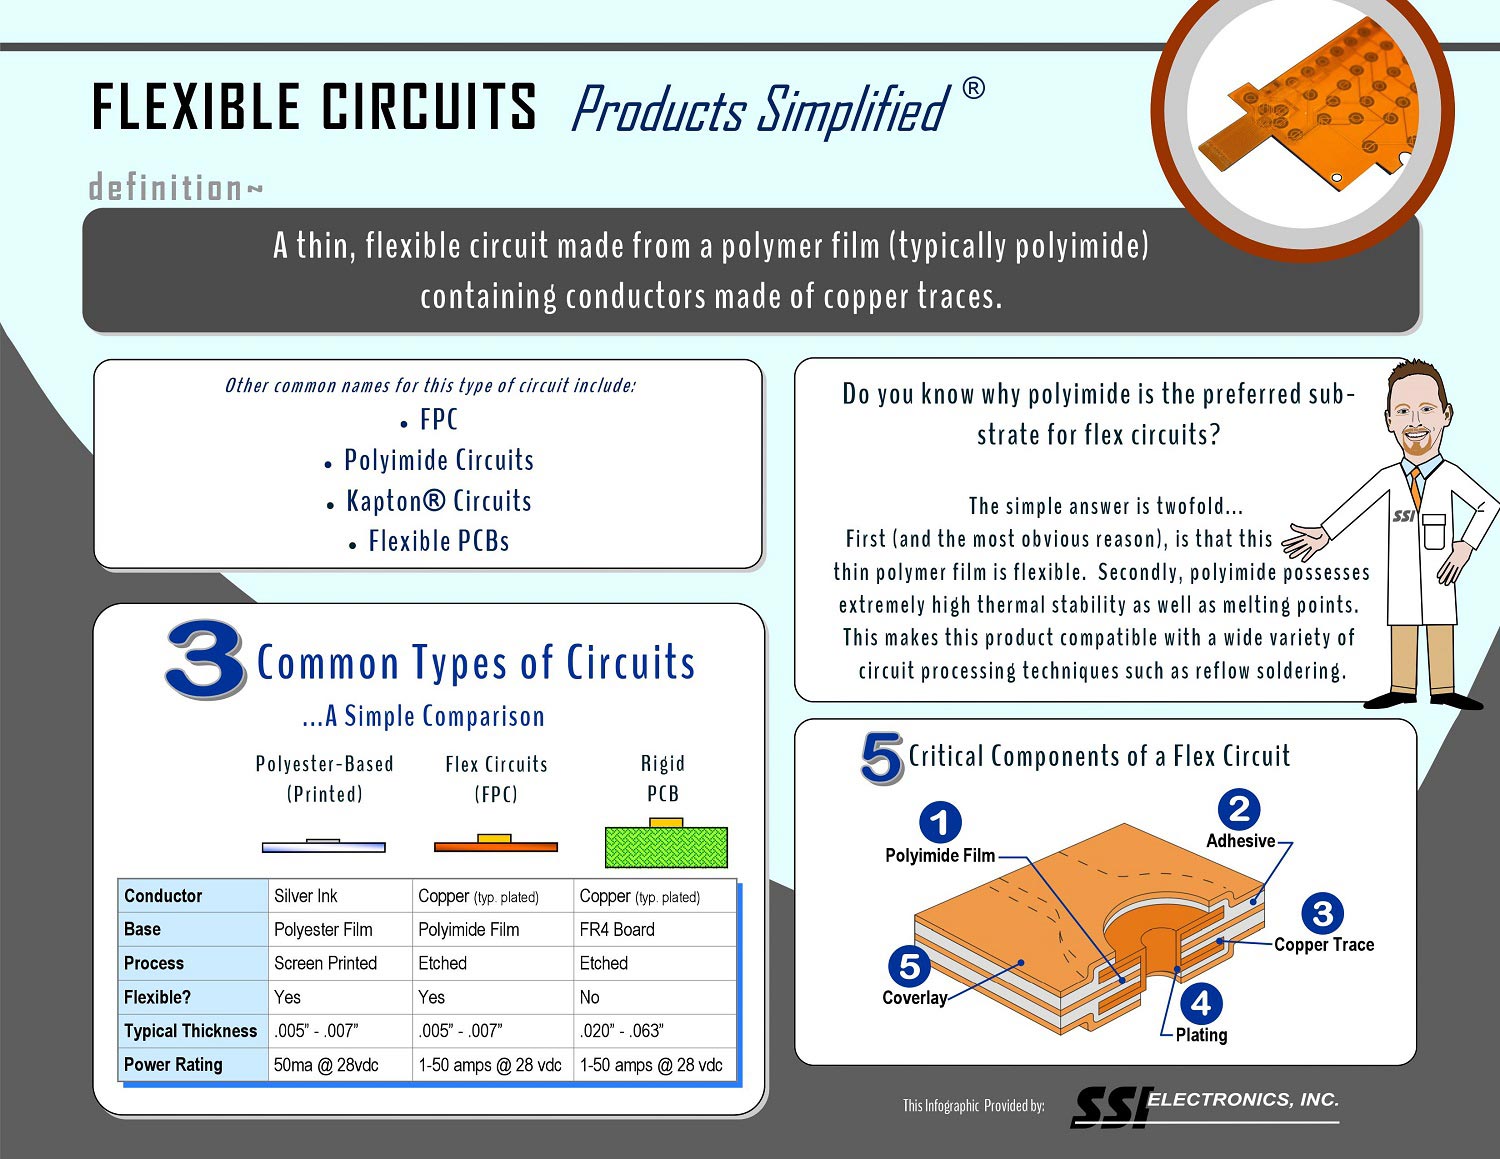 Infographic entitled Flexible Circuits Products Simplified giving an overview of the types of flexible circuits